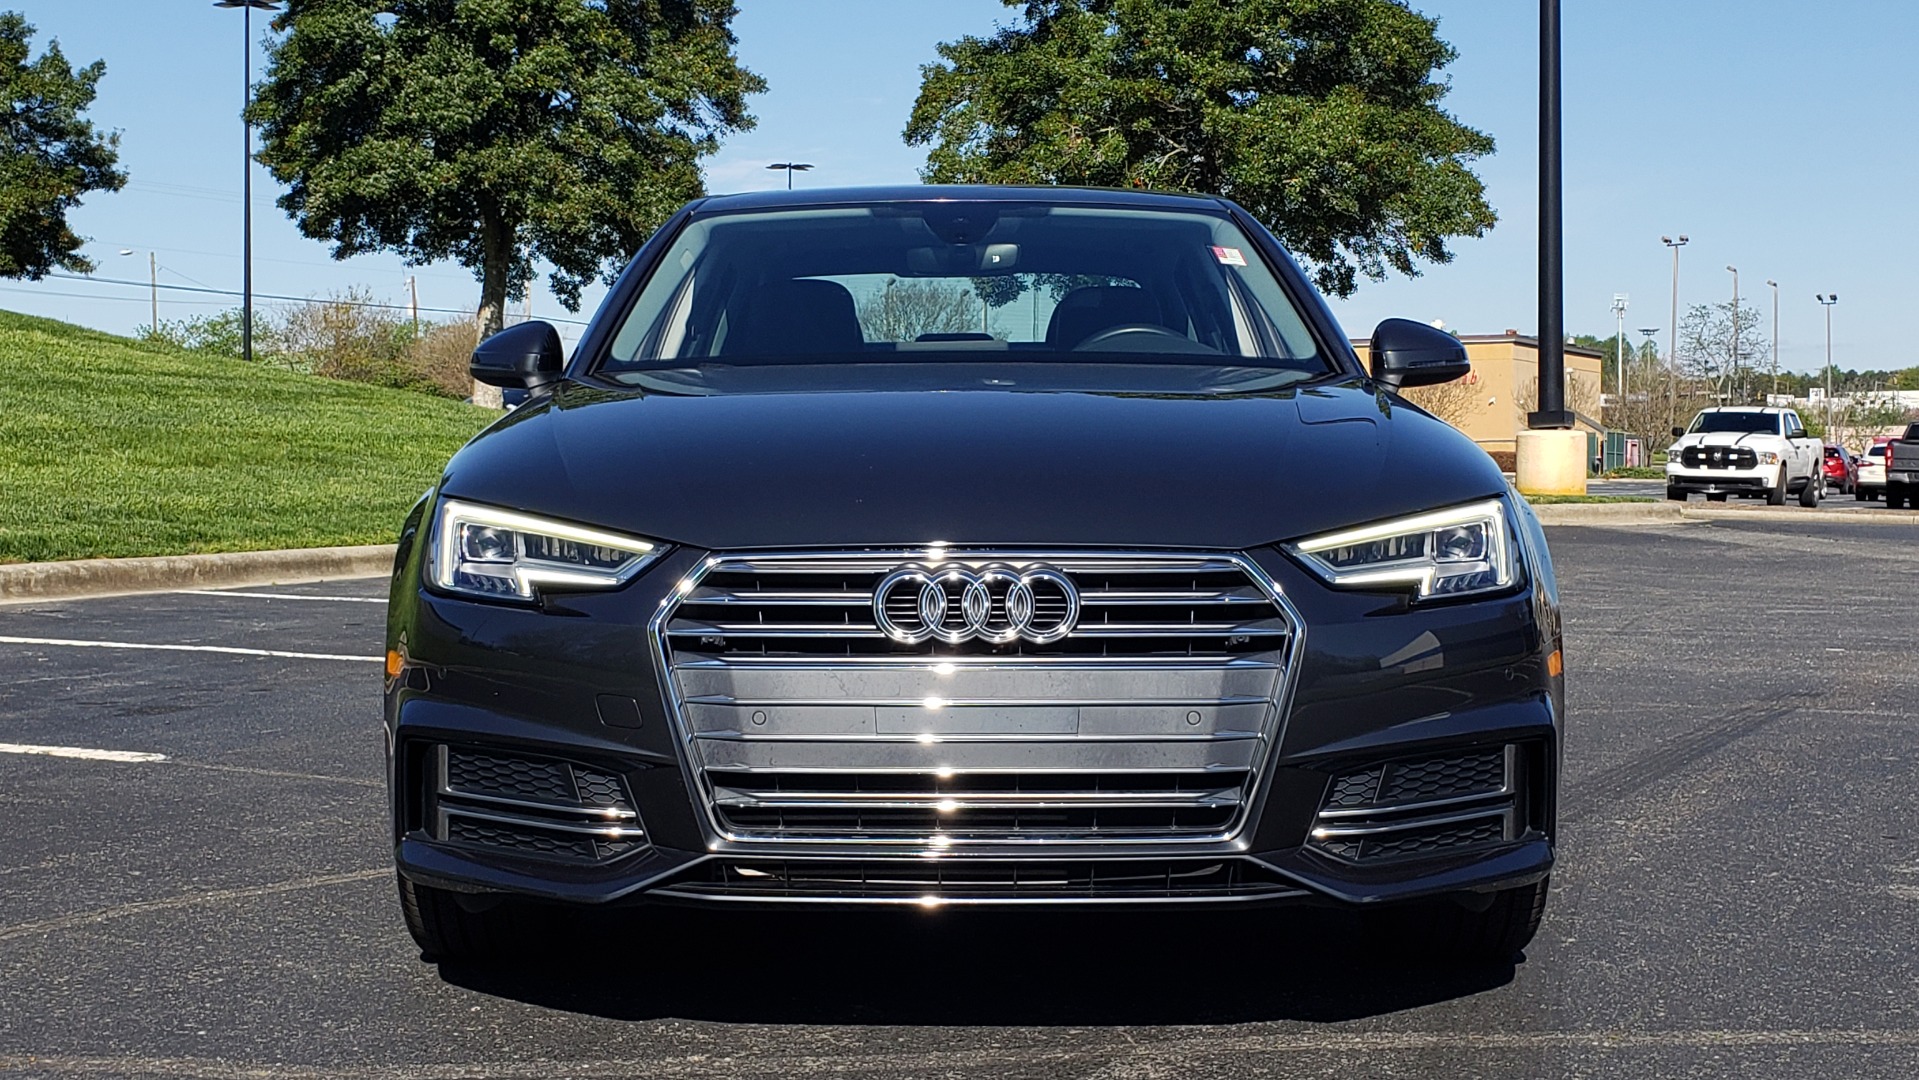 Used 2017 Audi A4 PREMIUM PLUS 2.0T S-TRONIC / NAV / SUNROOF / REARVIEW for sale Sold at Formula Imports in Charlotte NC 28227 23